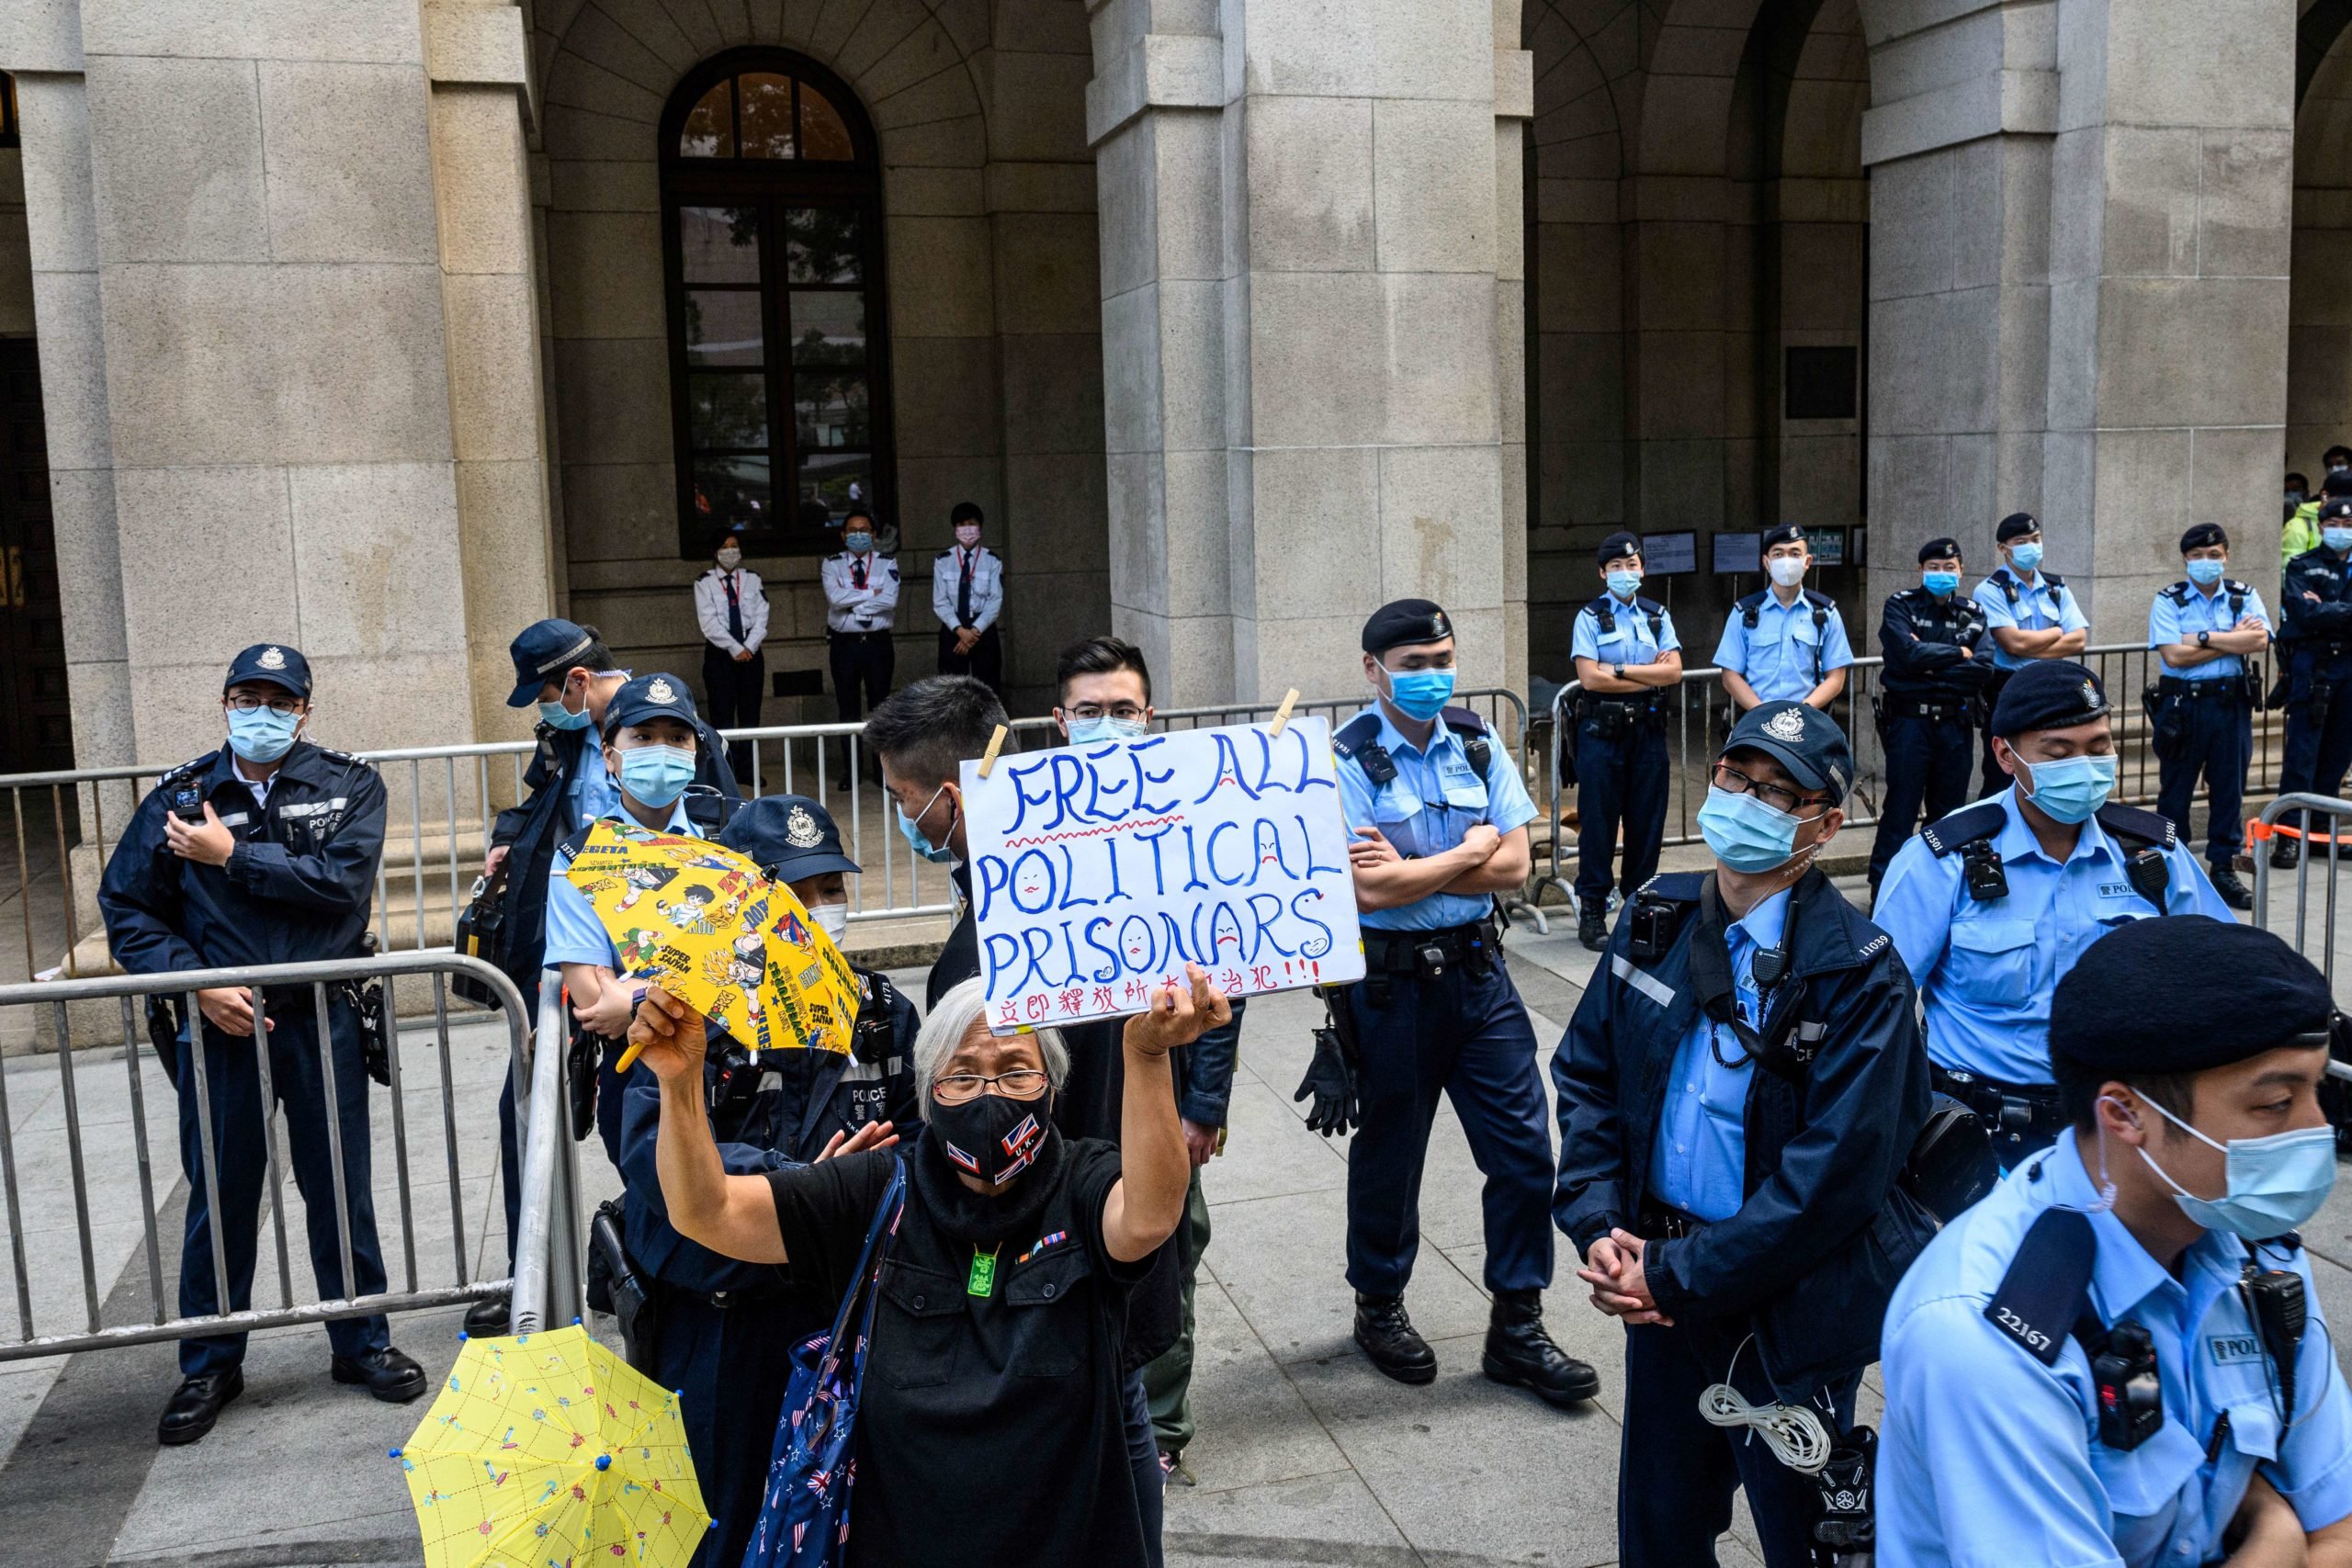 A pro-democracy activist holds up a placard as police stand guard outside the Court of Final Appeal in Hong Kong on February 1, 2021. (ANTHONY WALLACE/AFP via Getty Images)